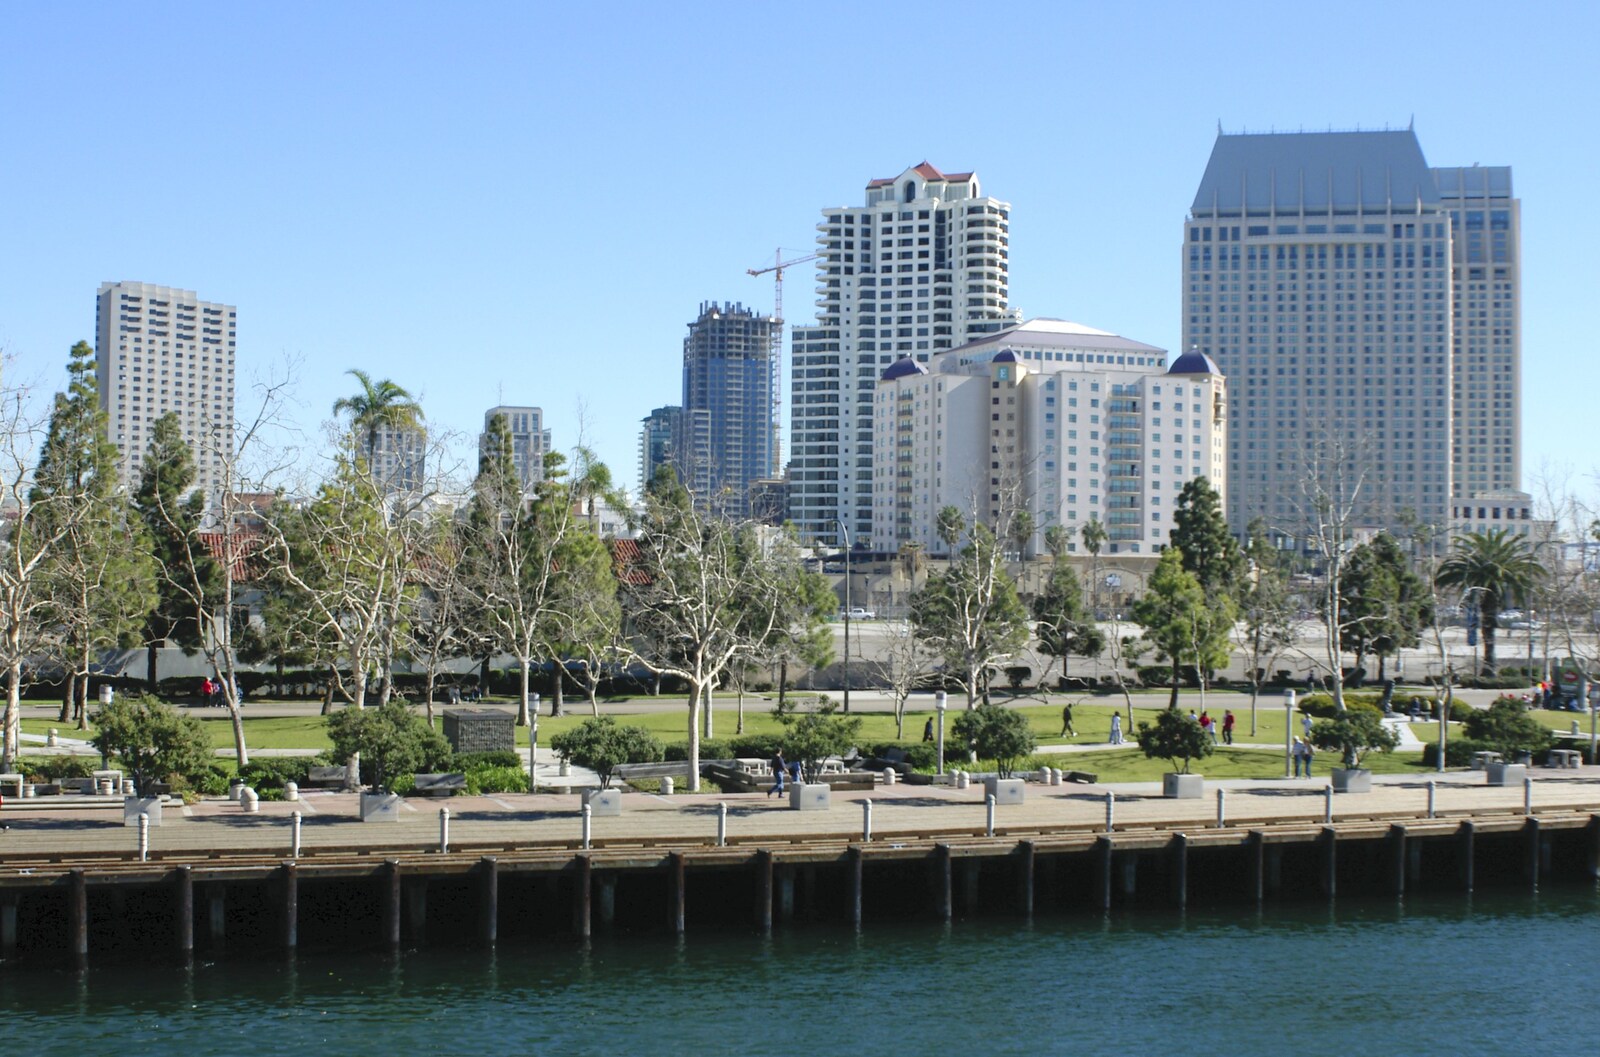 A Trip to San Diego, California, USA - 11th January 2005: A view of San Diego and the Manchester Grand Hyatt